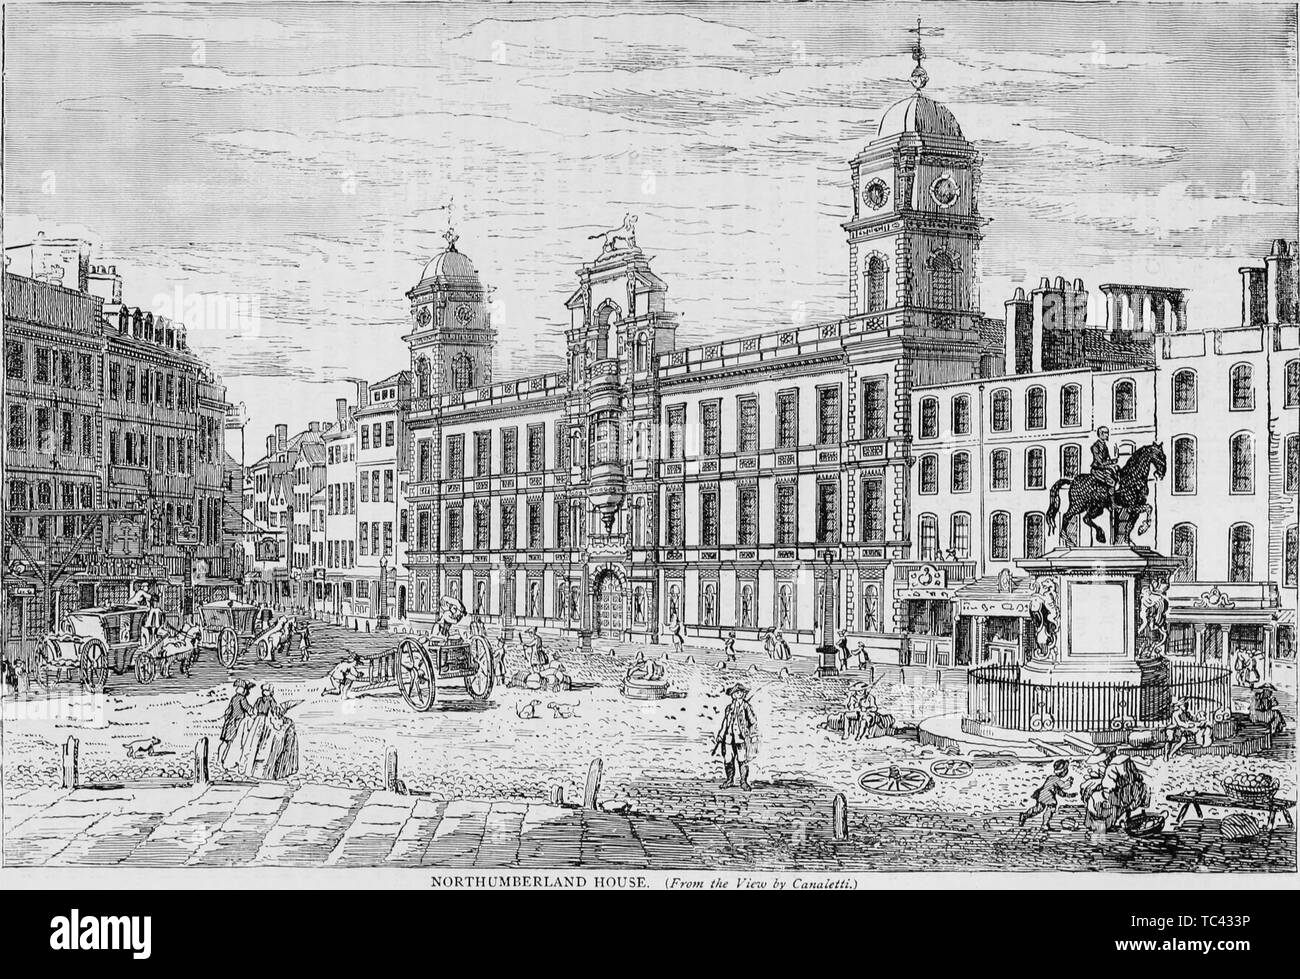 Engraving of the Northumberland House at Charing Cross, London, England, from the book 'Old and new London: a narrative of its history, its people, and its places' by Thornbury Walter, 1873. Courtesy Internet Archive. () Stock Photo